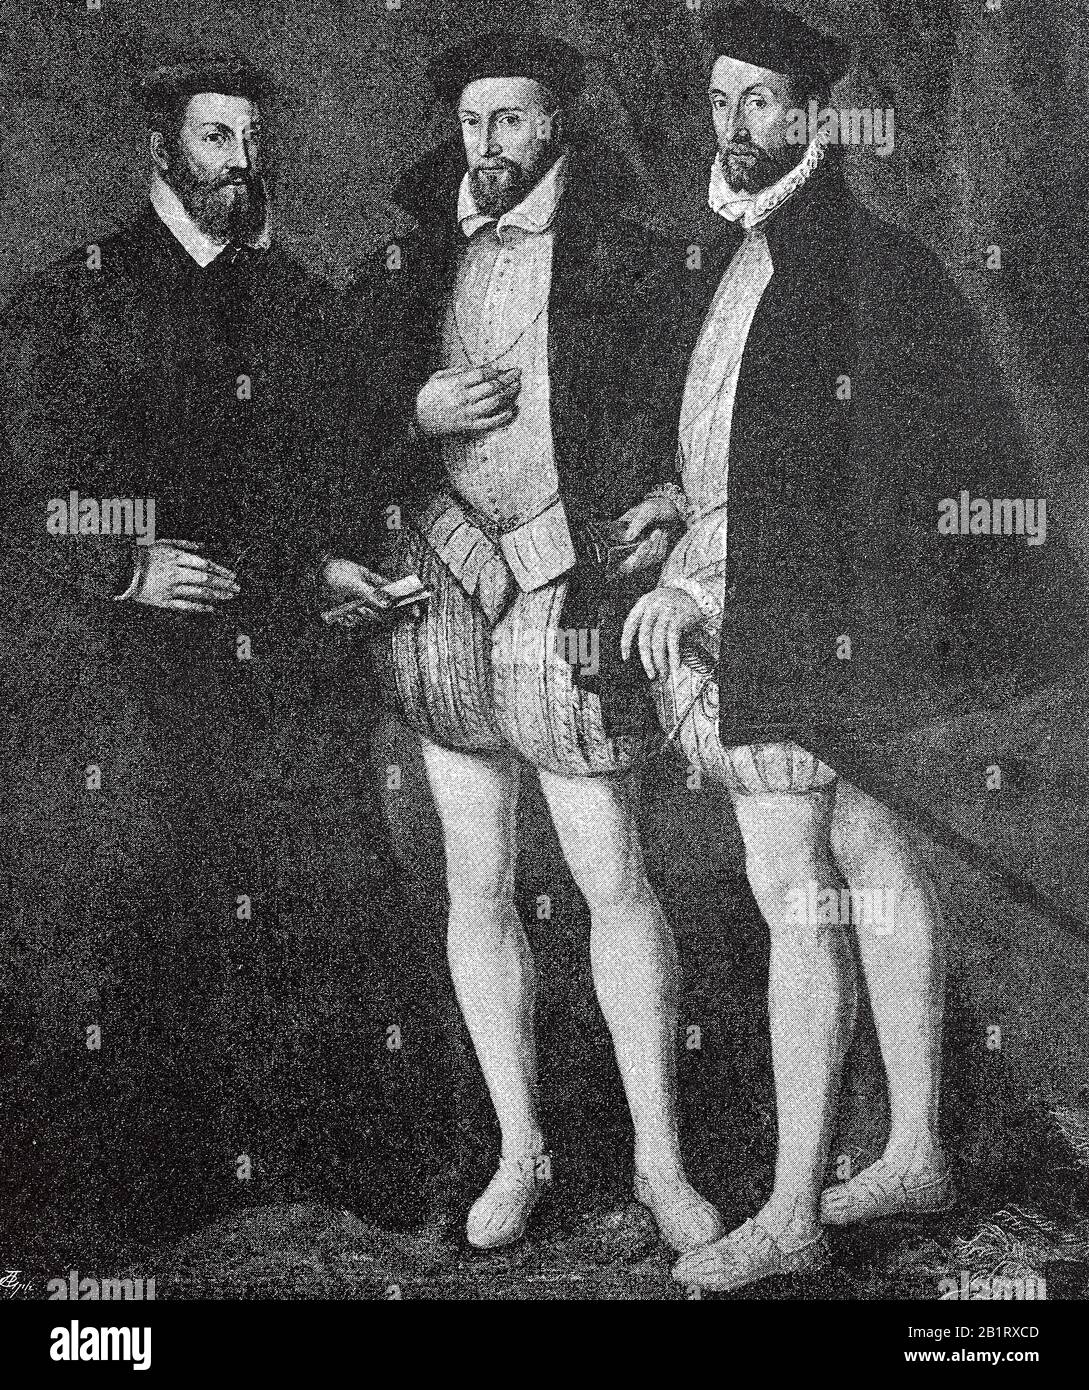 The three brothers of Chatillon-Coligny: Odet de Coligny, Cardinal von Châtillon, 1517-1571, a French Huguenot leader, Gaspard II. De Coligny, Comte de Coligny, Pair of France, 1519-1572, a French nobleman, admiral and Huguenot leader , Francois de Coligny-d'Andelot, 1521-1569, Colonel general of the French infantry  /  Die drei Brüder von Chatillon-Coligny: Odet de Coligny, Kardinal von Châtillon, ein französischer Hugenottenführer, Gaspard II. de Coligny, Comte de Coligny, Pair von Frankreich, ein französischer Adeliger, Admiral und Hugenottenführer, Francois de Coligny-d’Andelot, Colonel ge Stock Photo